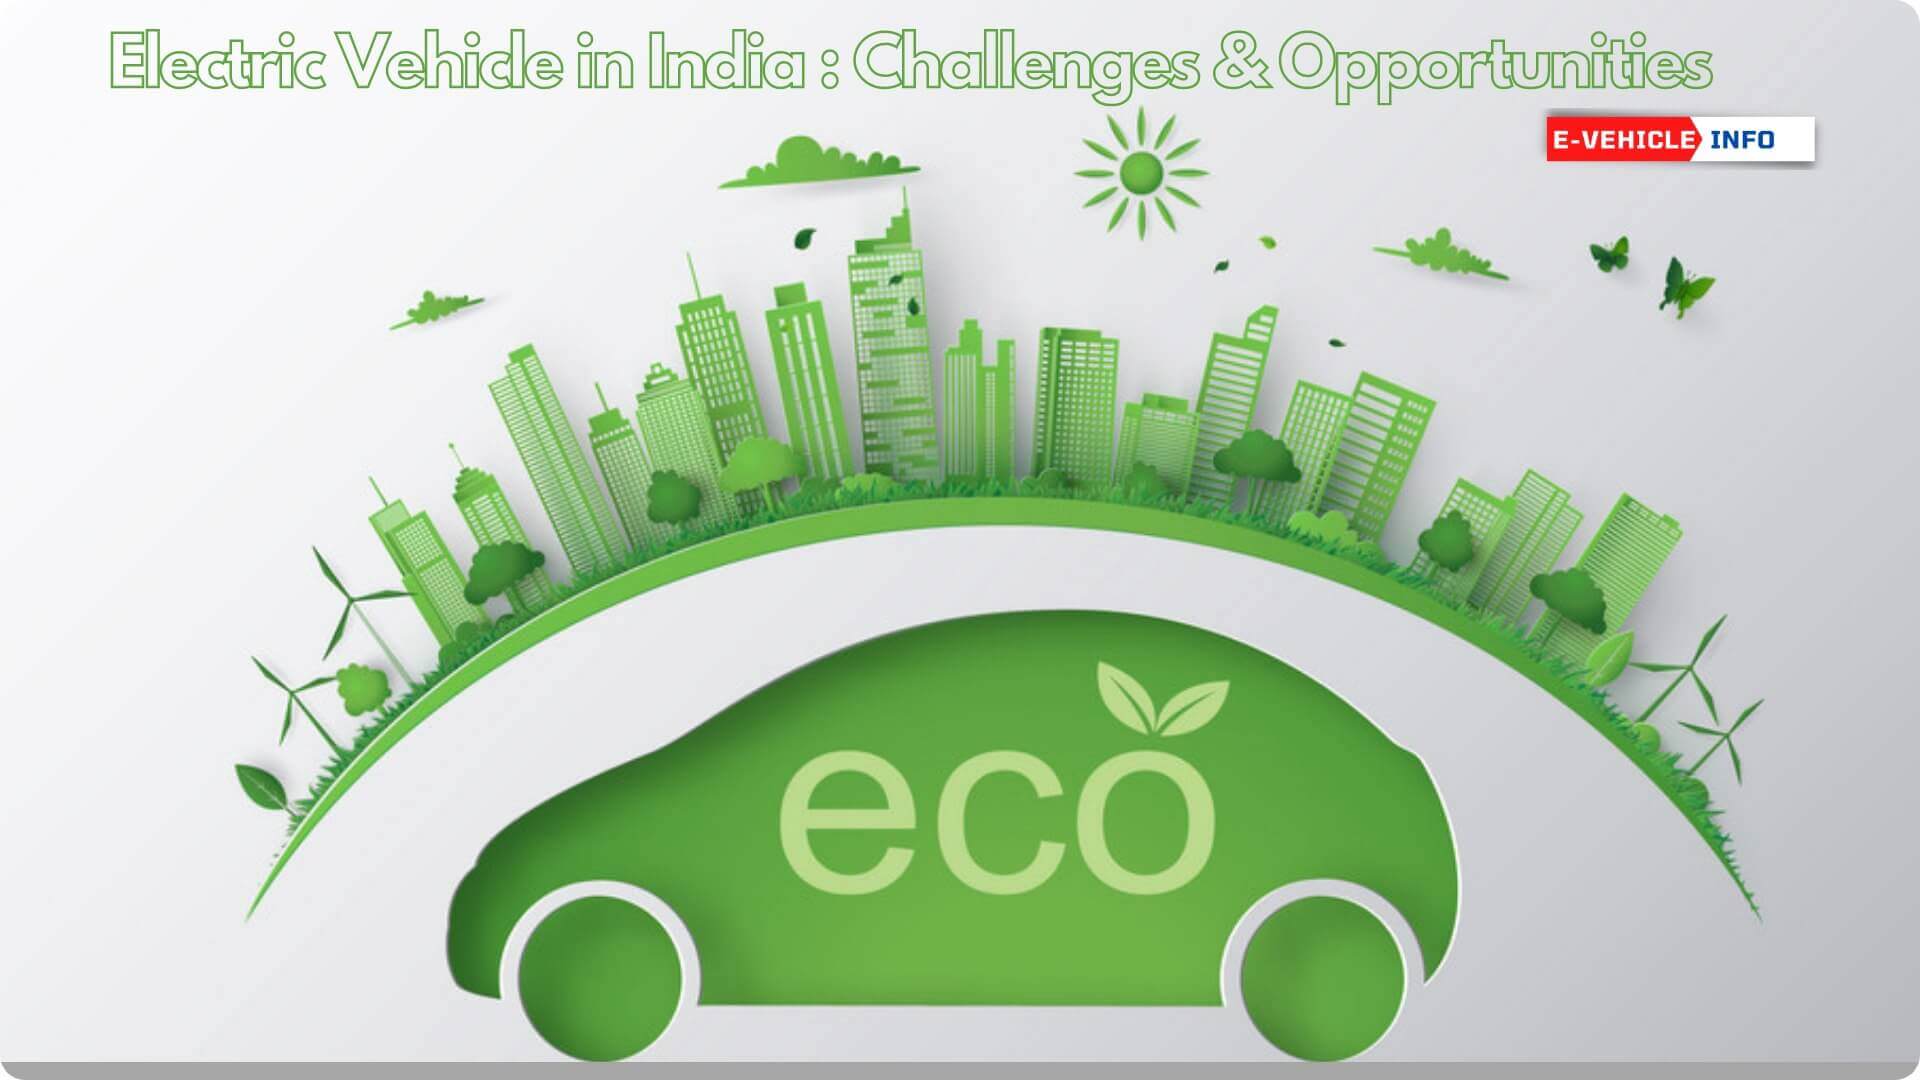 https://e-vehicleinfo.com/electric-vehicle-in-india-challenges-opportunities/